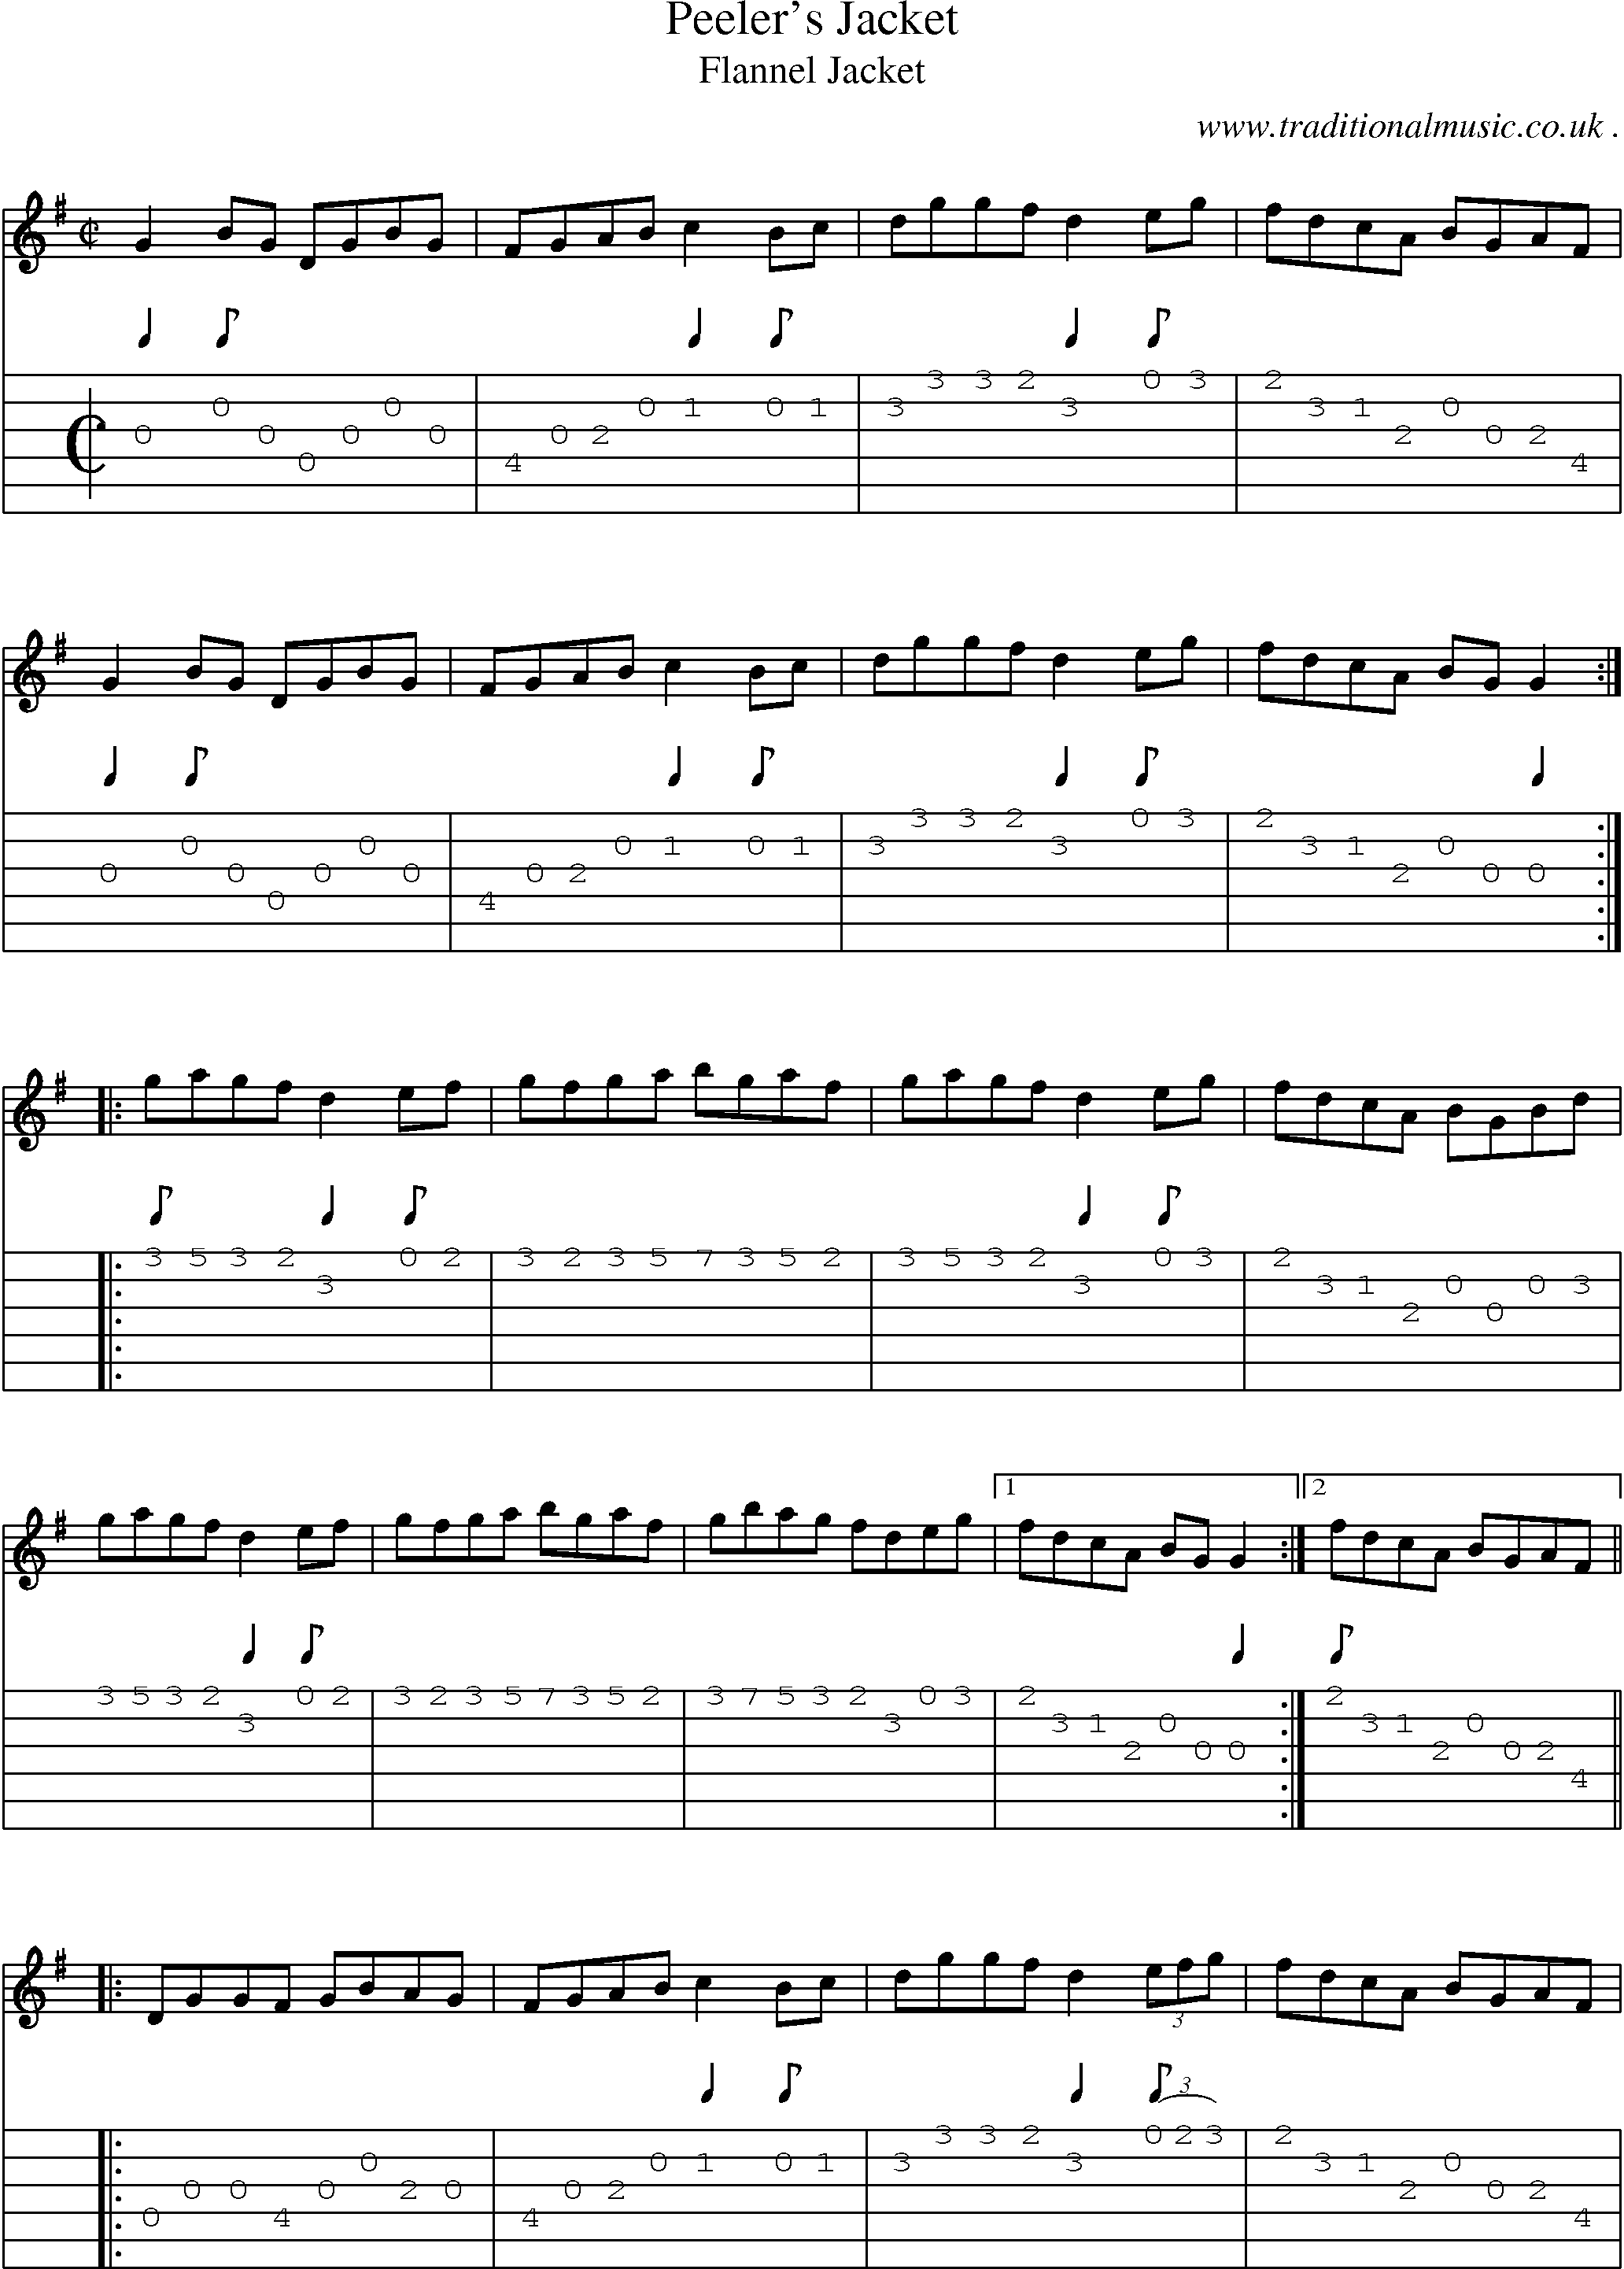 Sheet-Music and Guitar Tabs for Peelers Jacket